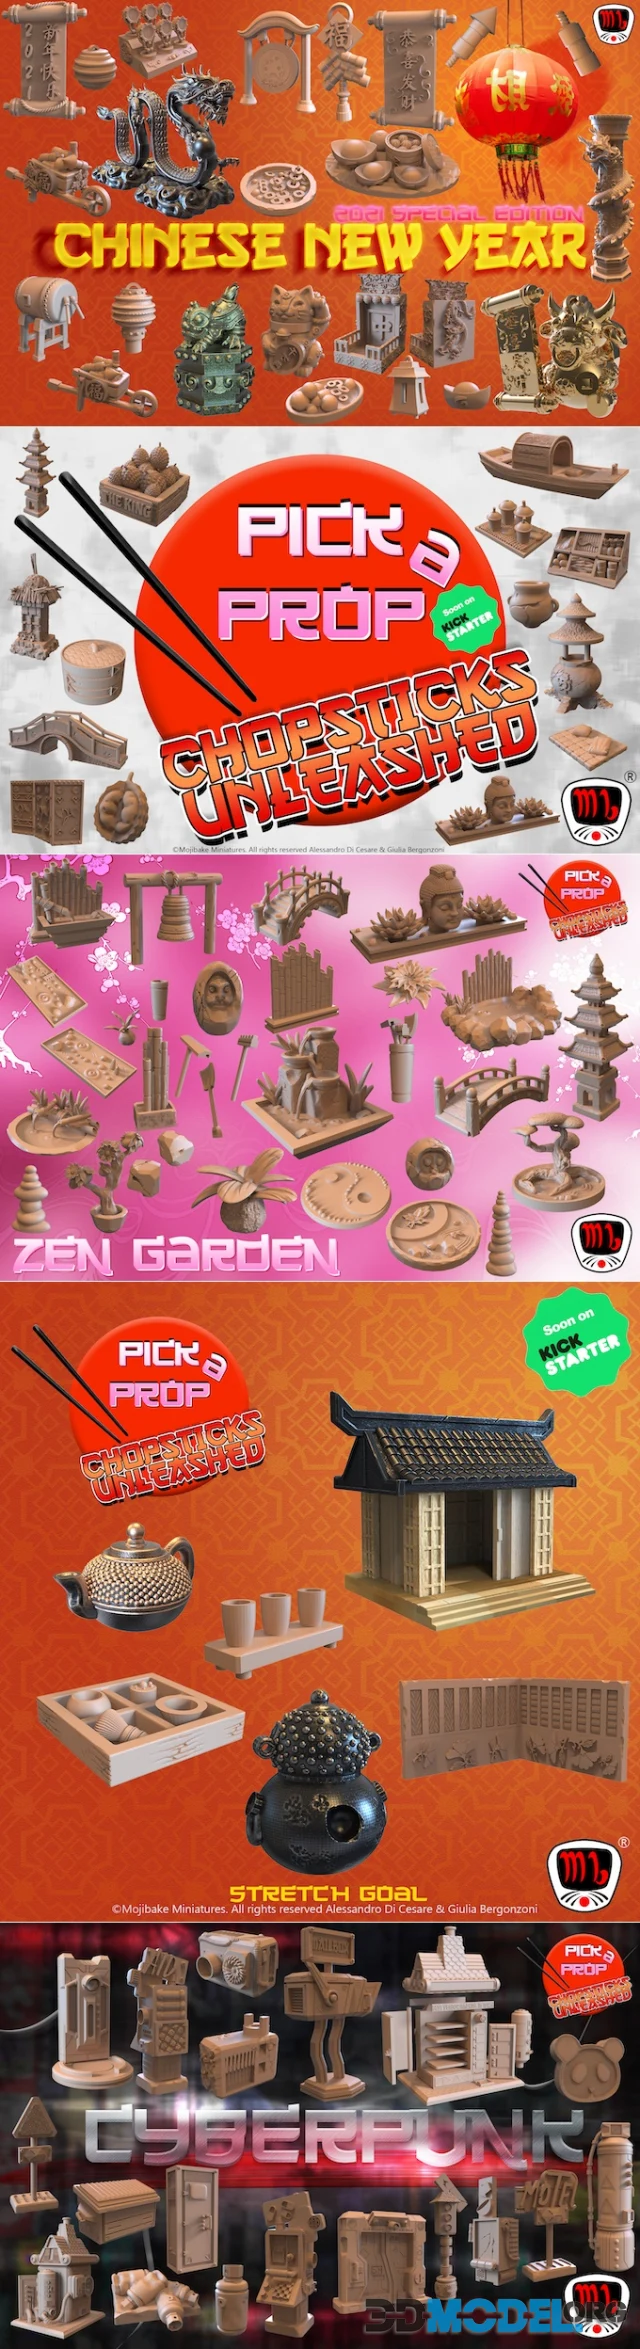 Pick  A Prop! Chopstick Unleashed! Chinese new year props Kickstarter – Printable